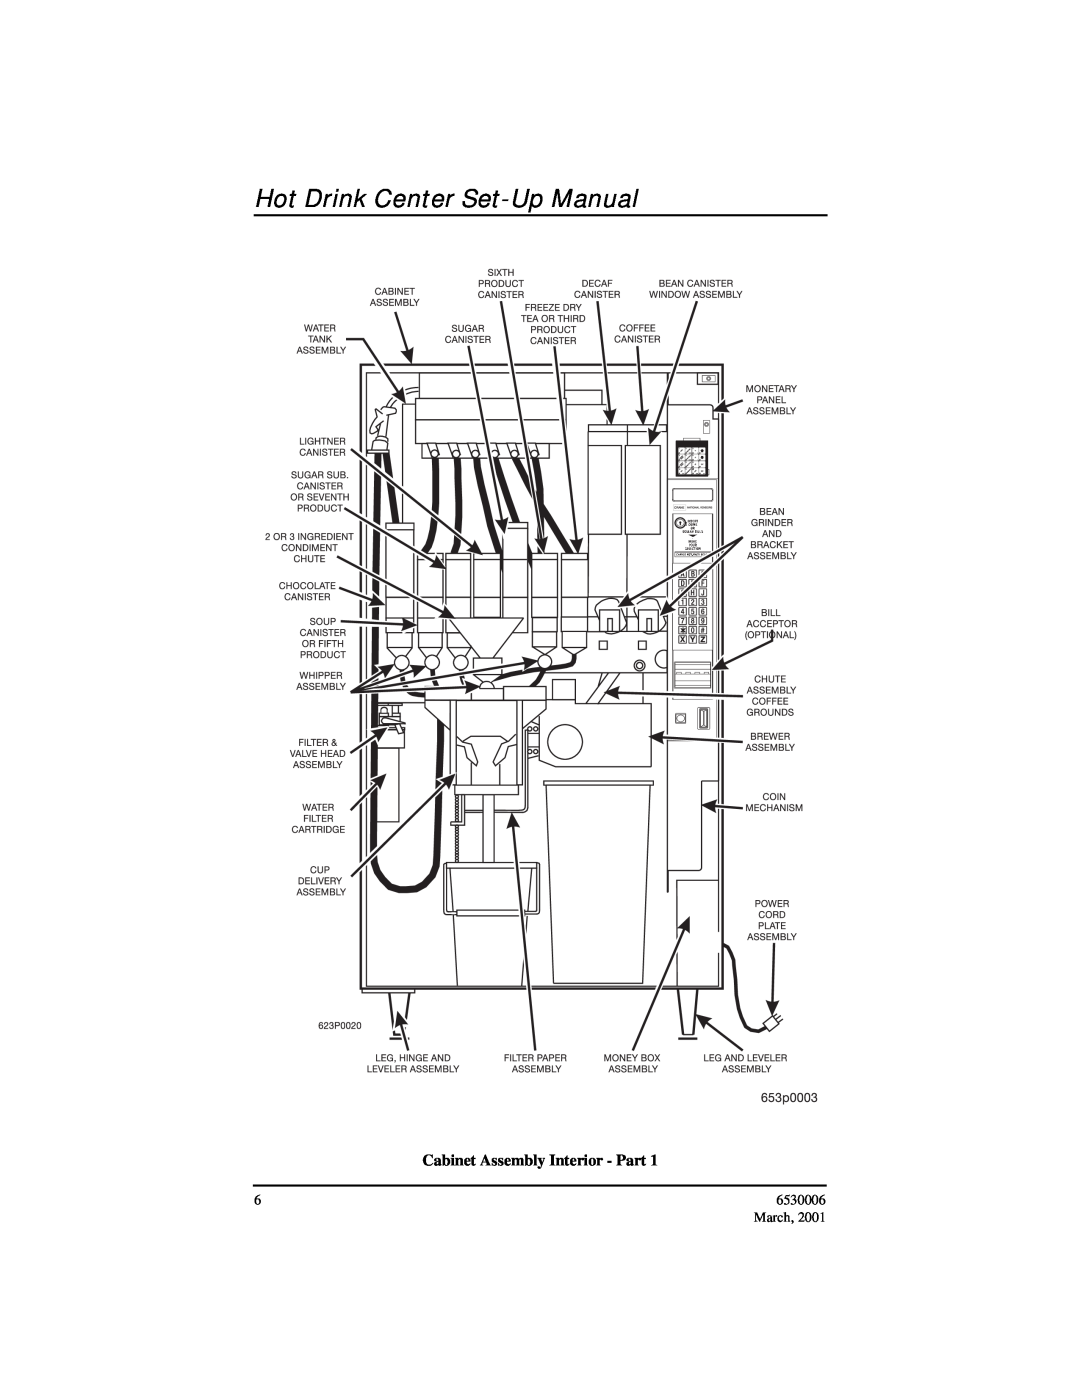 Crane Merchandising Systems manual Hot Drink Center Set-Up Manual, Cabinet Assembly Interior - Part, 6530006, March 